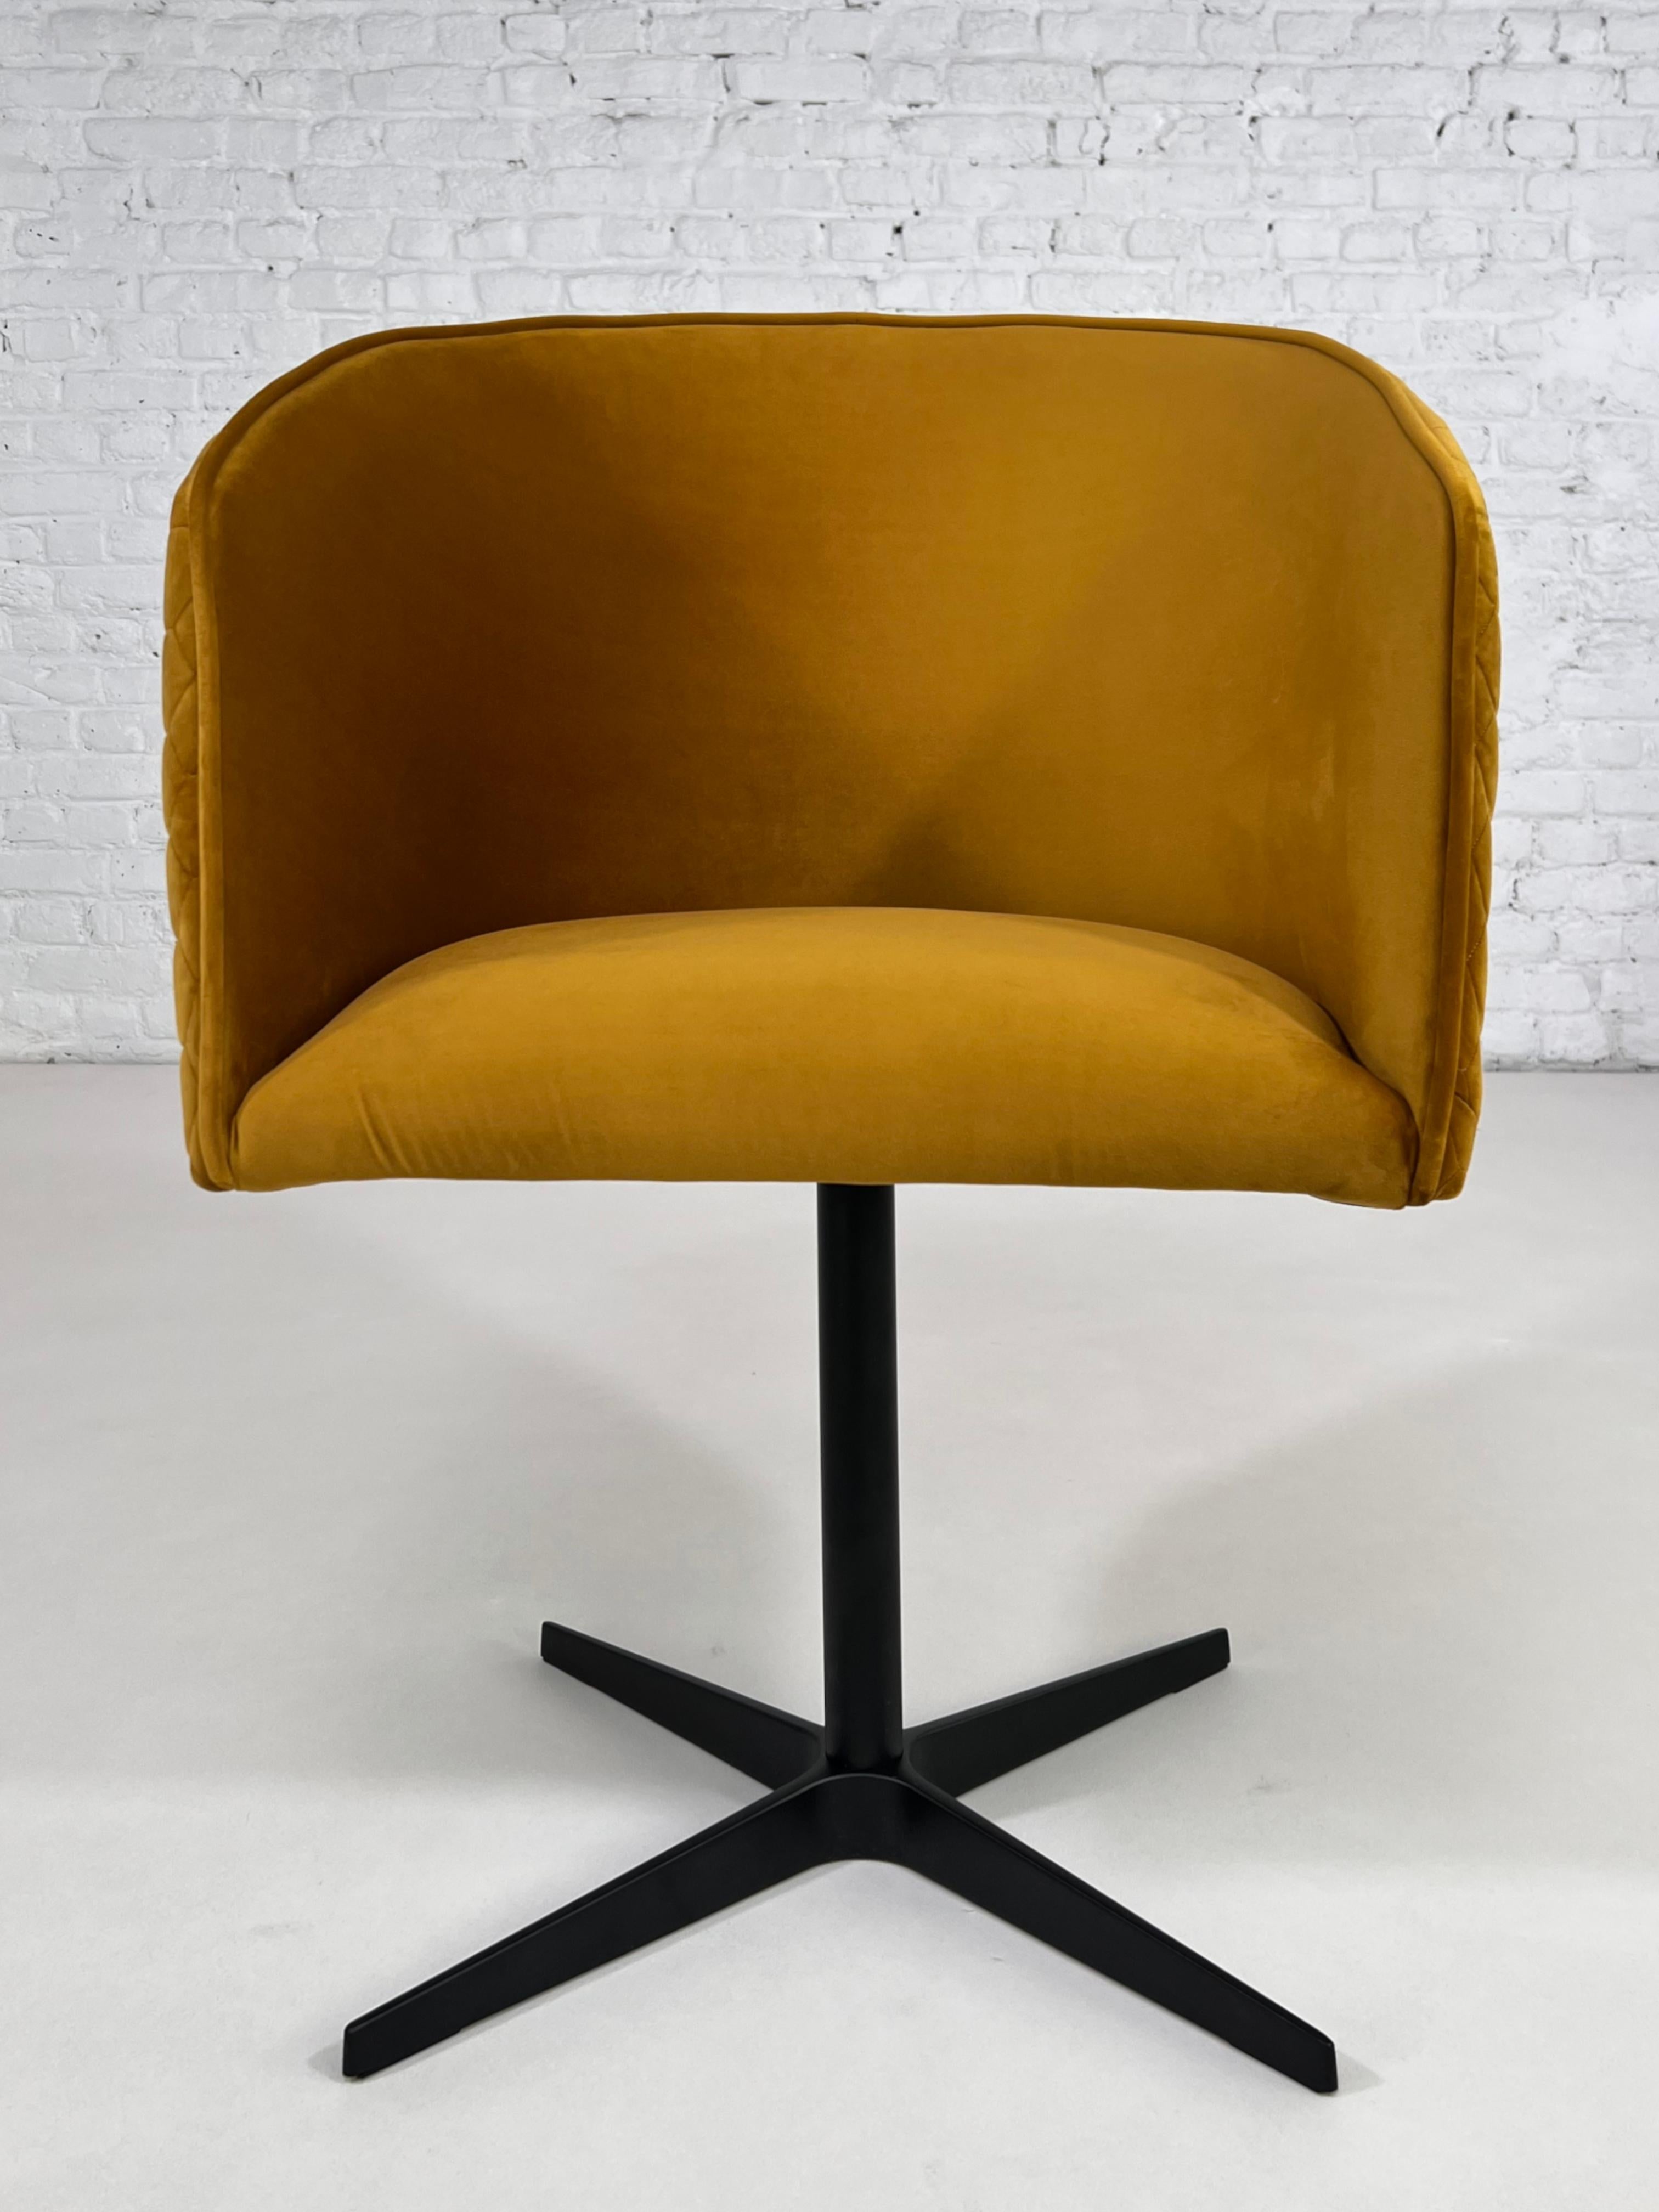 European 1950s MCM Design Style Velvet And Black Lacquered Metal Swivel Chair For Sale